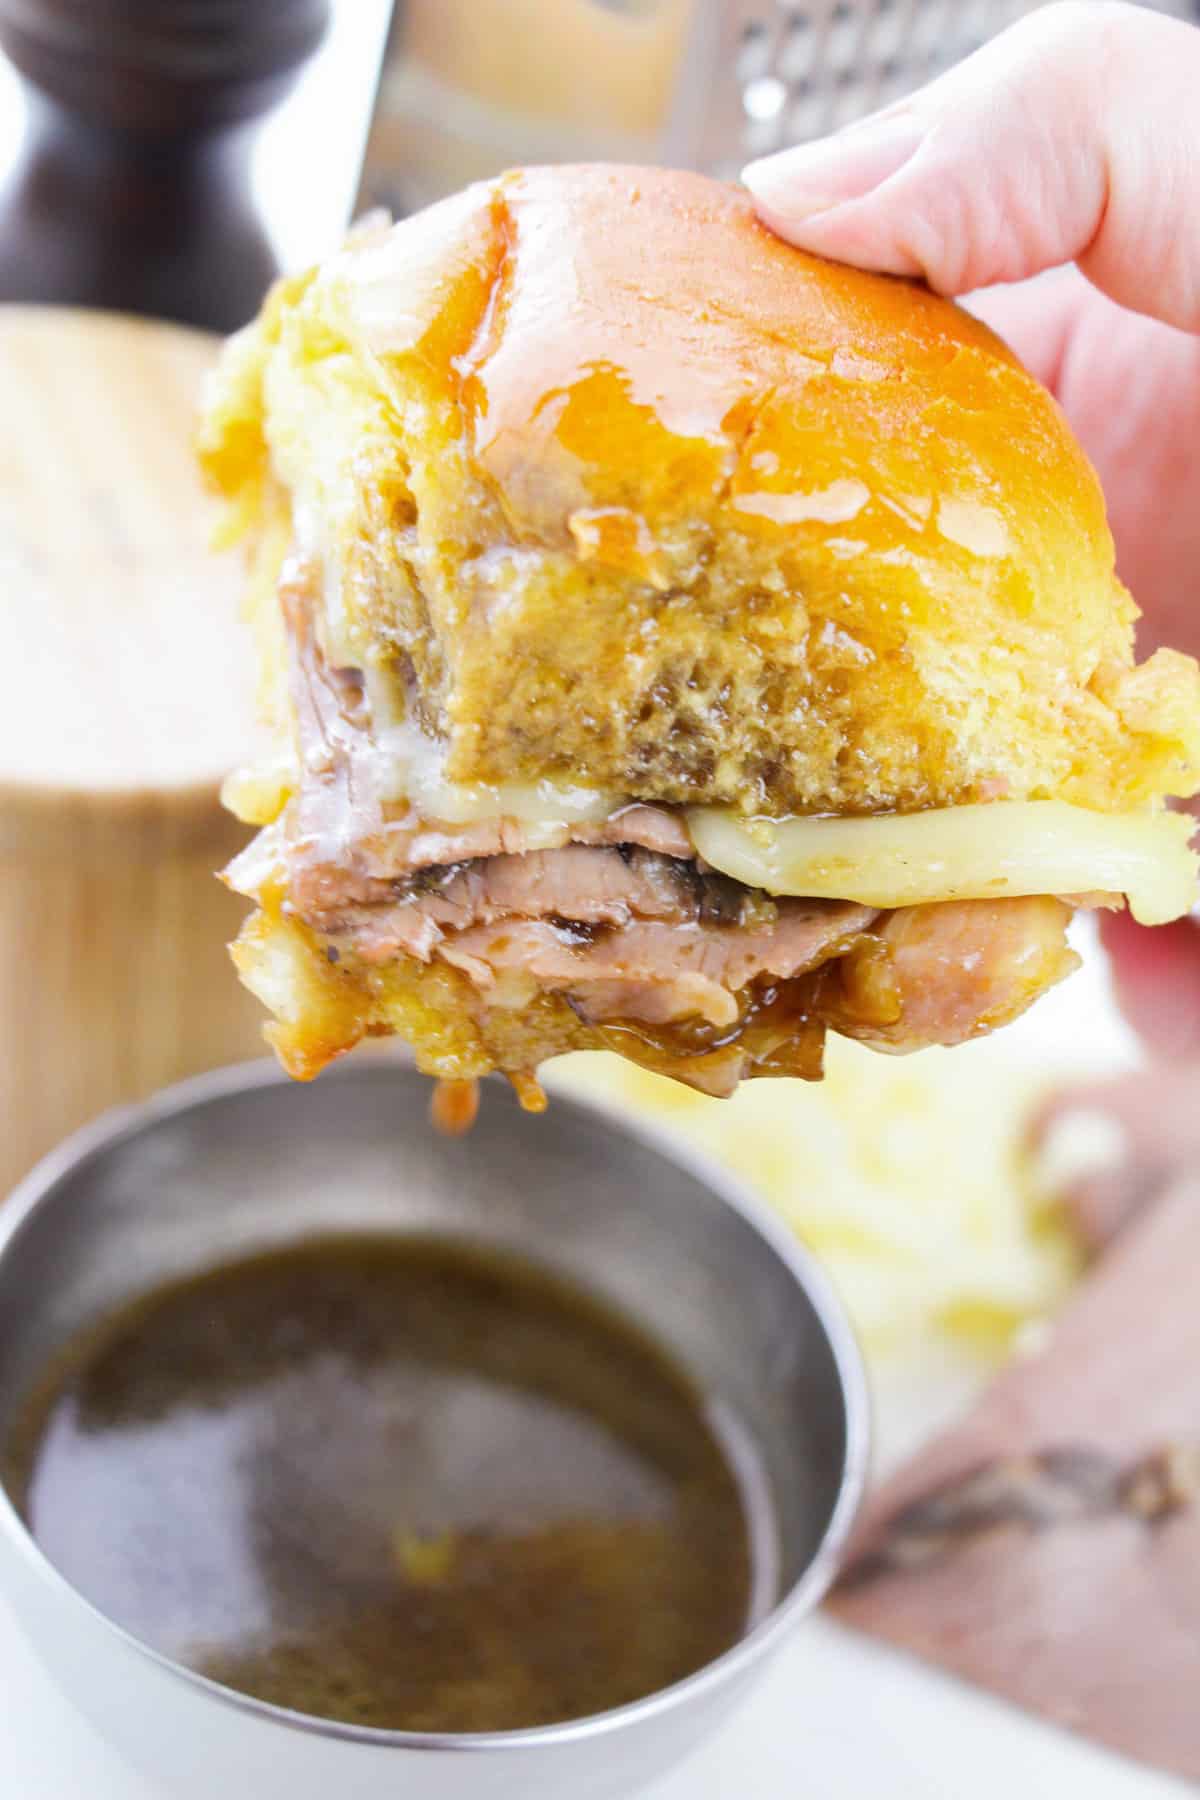 Hand holding French dip roast beef slider and dipping it in au jus sauce.